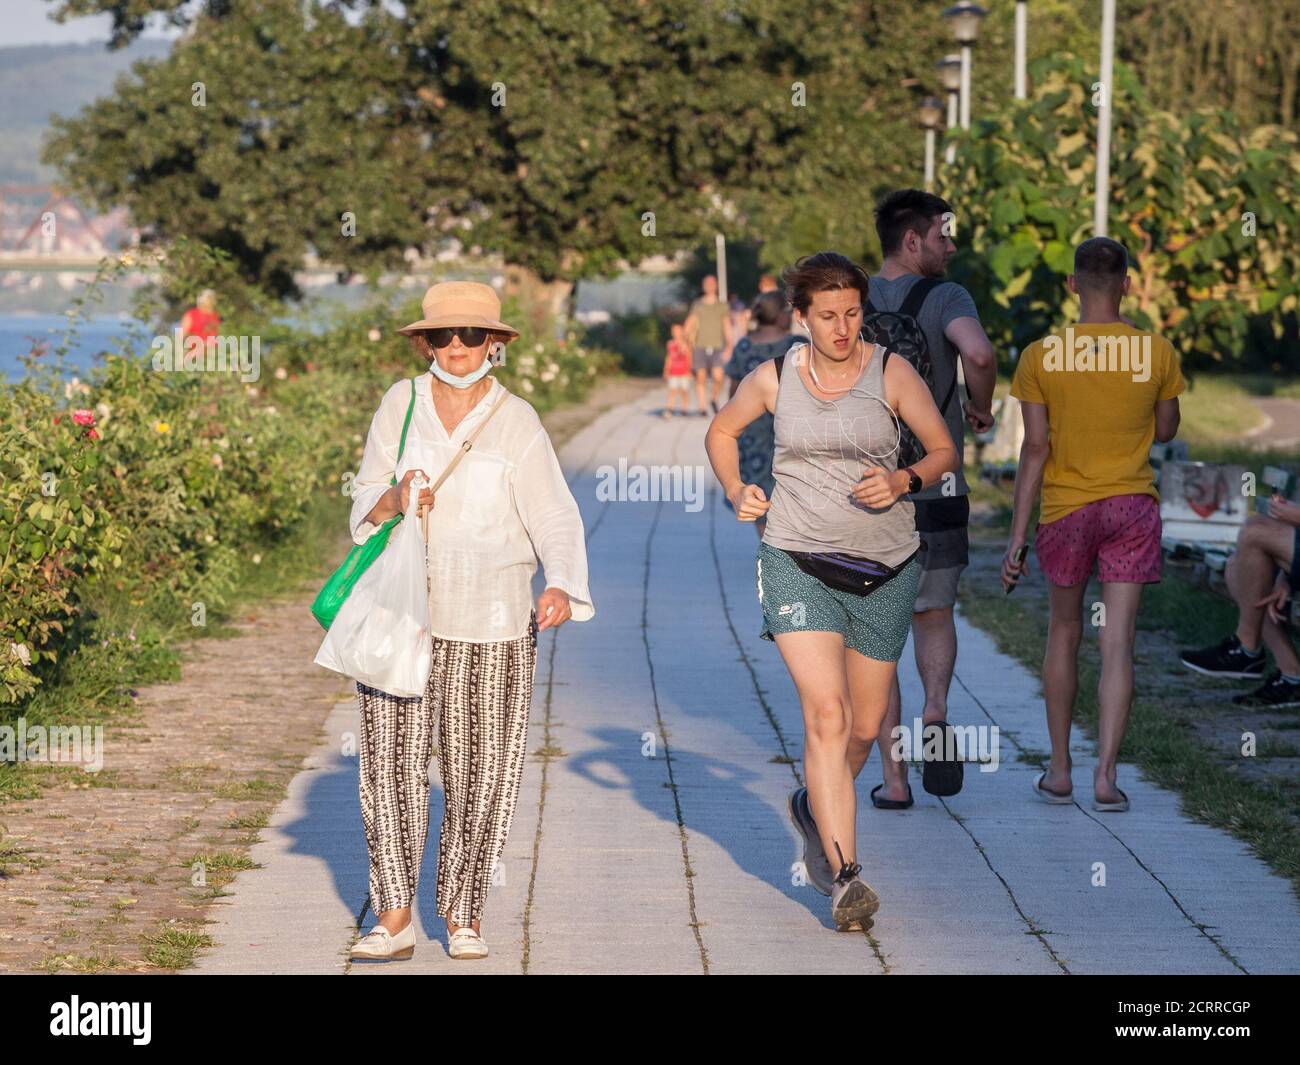 BELGRADE, SERBIA - AUGUST 29 2020: Old woman wwalking with a facemask while a younger girl works out runs next to her without face mask protective equ Stock Photo